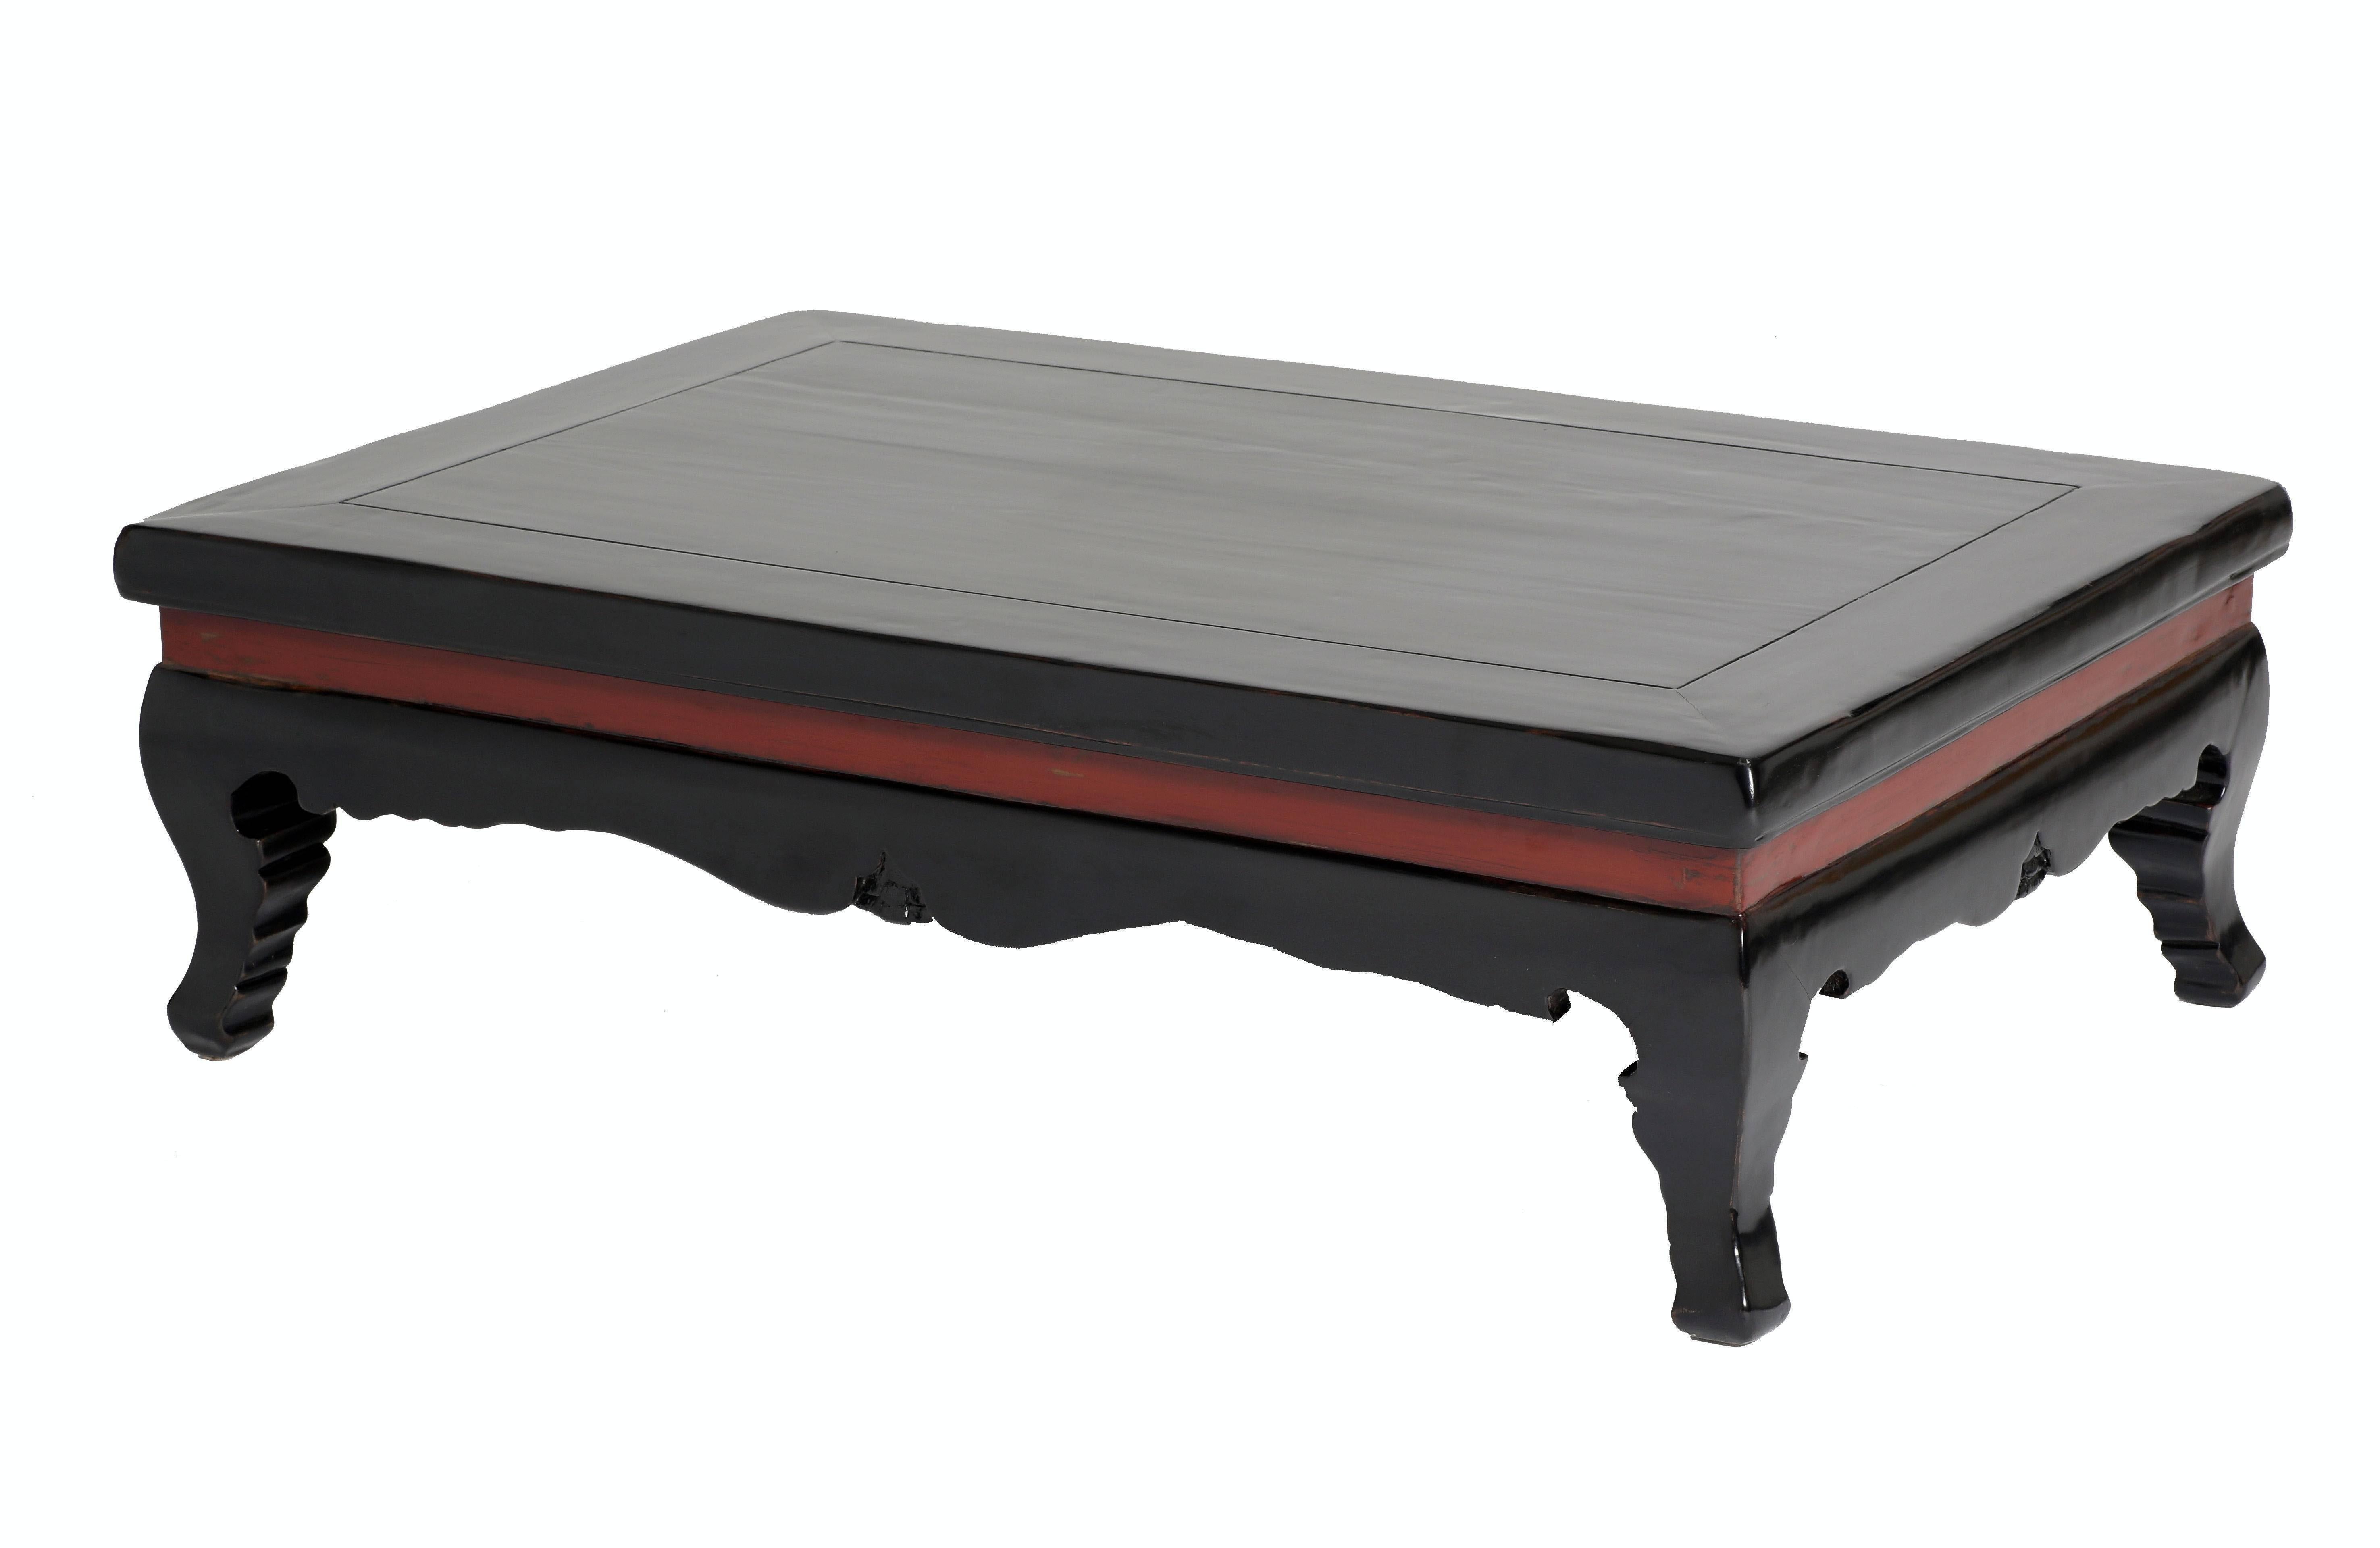 The fine kang table covered in rich original lacquer, featuring a floating top panel enclosed within a rounded edged frame, above a waist, cusped curvilinear aprons and cabriole legs with foliage edges
Black & Red Lacquer over Cypress
Sha’anxi,